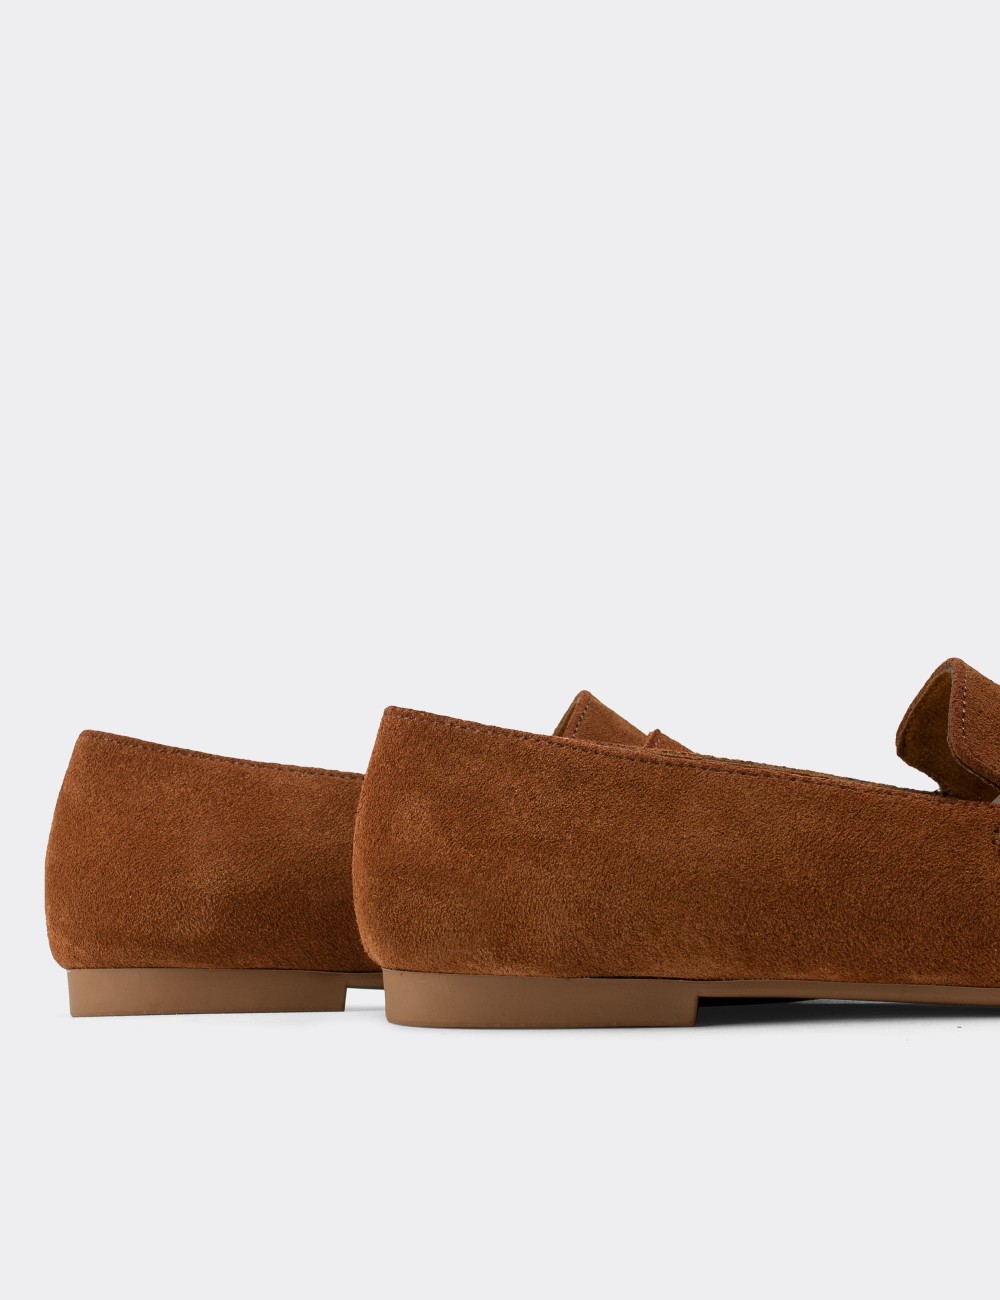 Tan Suede Leather Loafers - 01914ZTBAC01